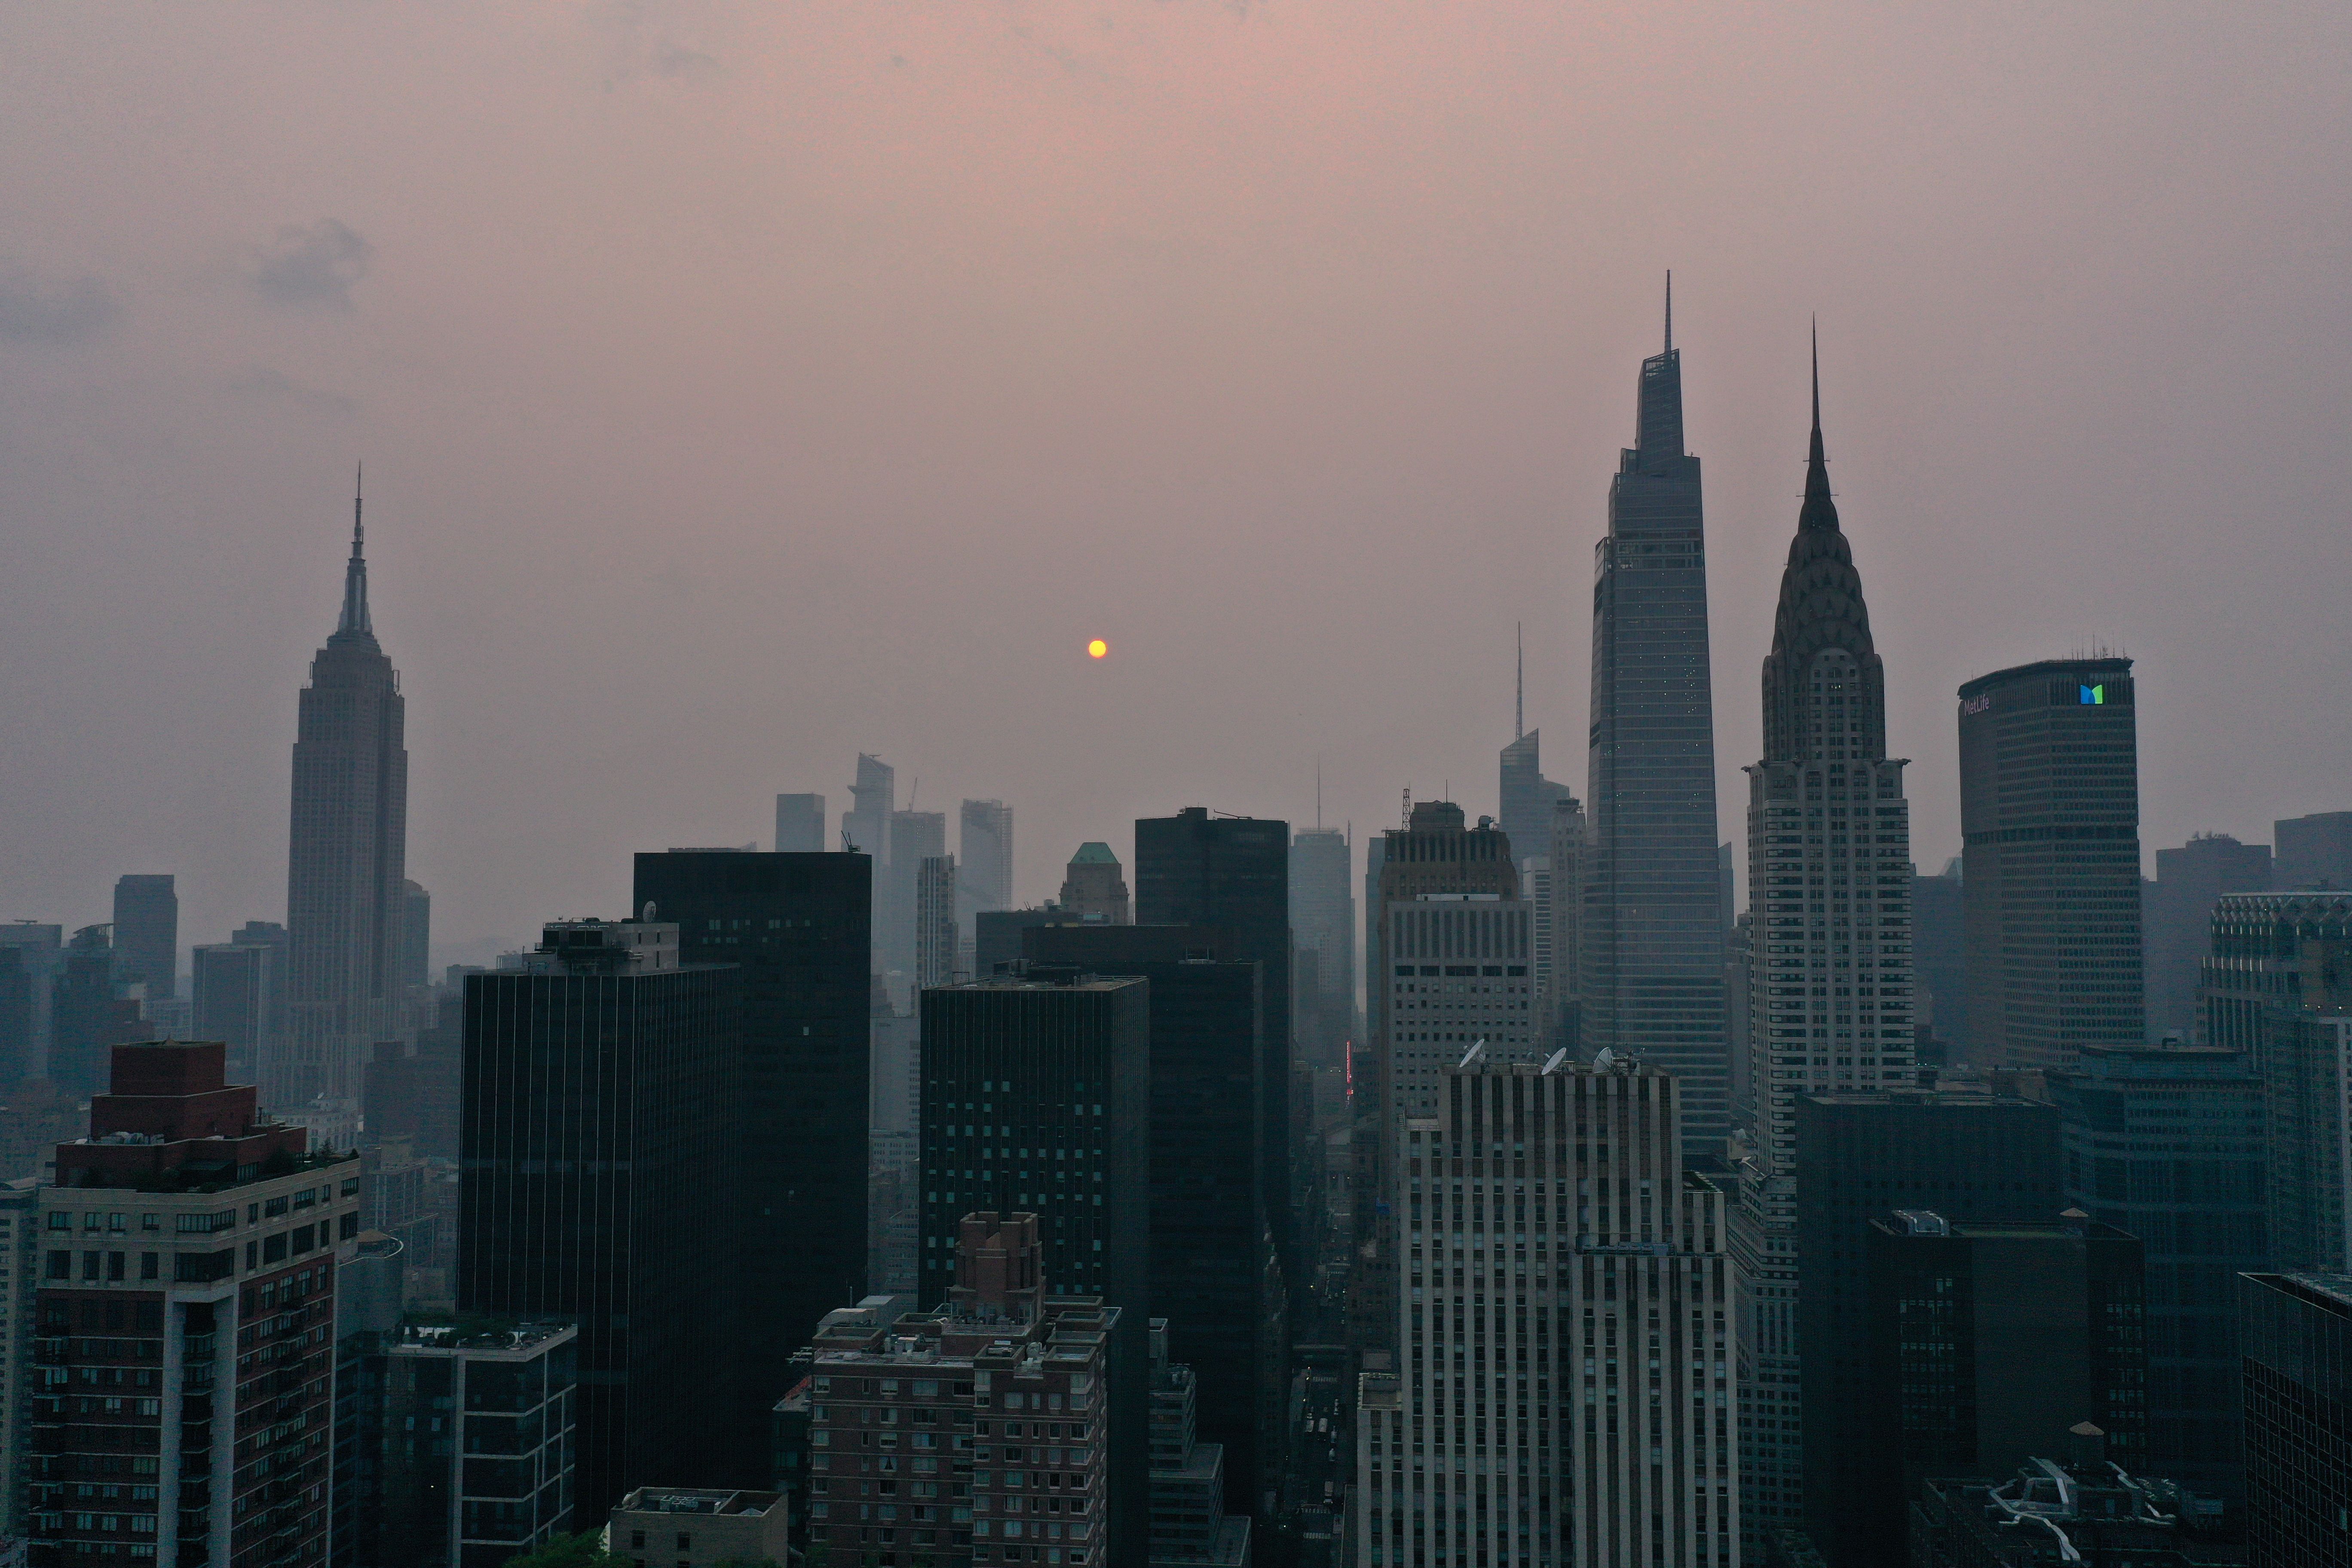 Sunlight interacting with the wildfire smoke, causing the sun to appear with a reddish-orange tint in New York City on July 20.